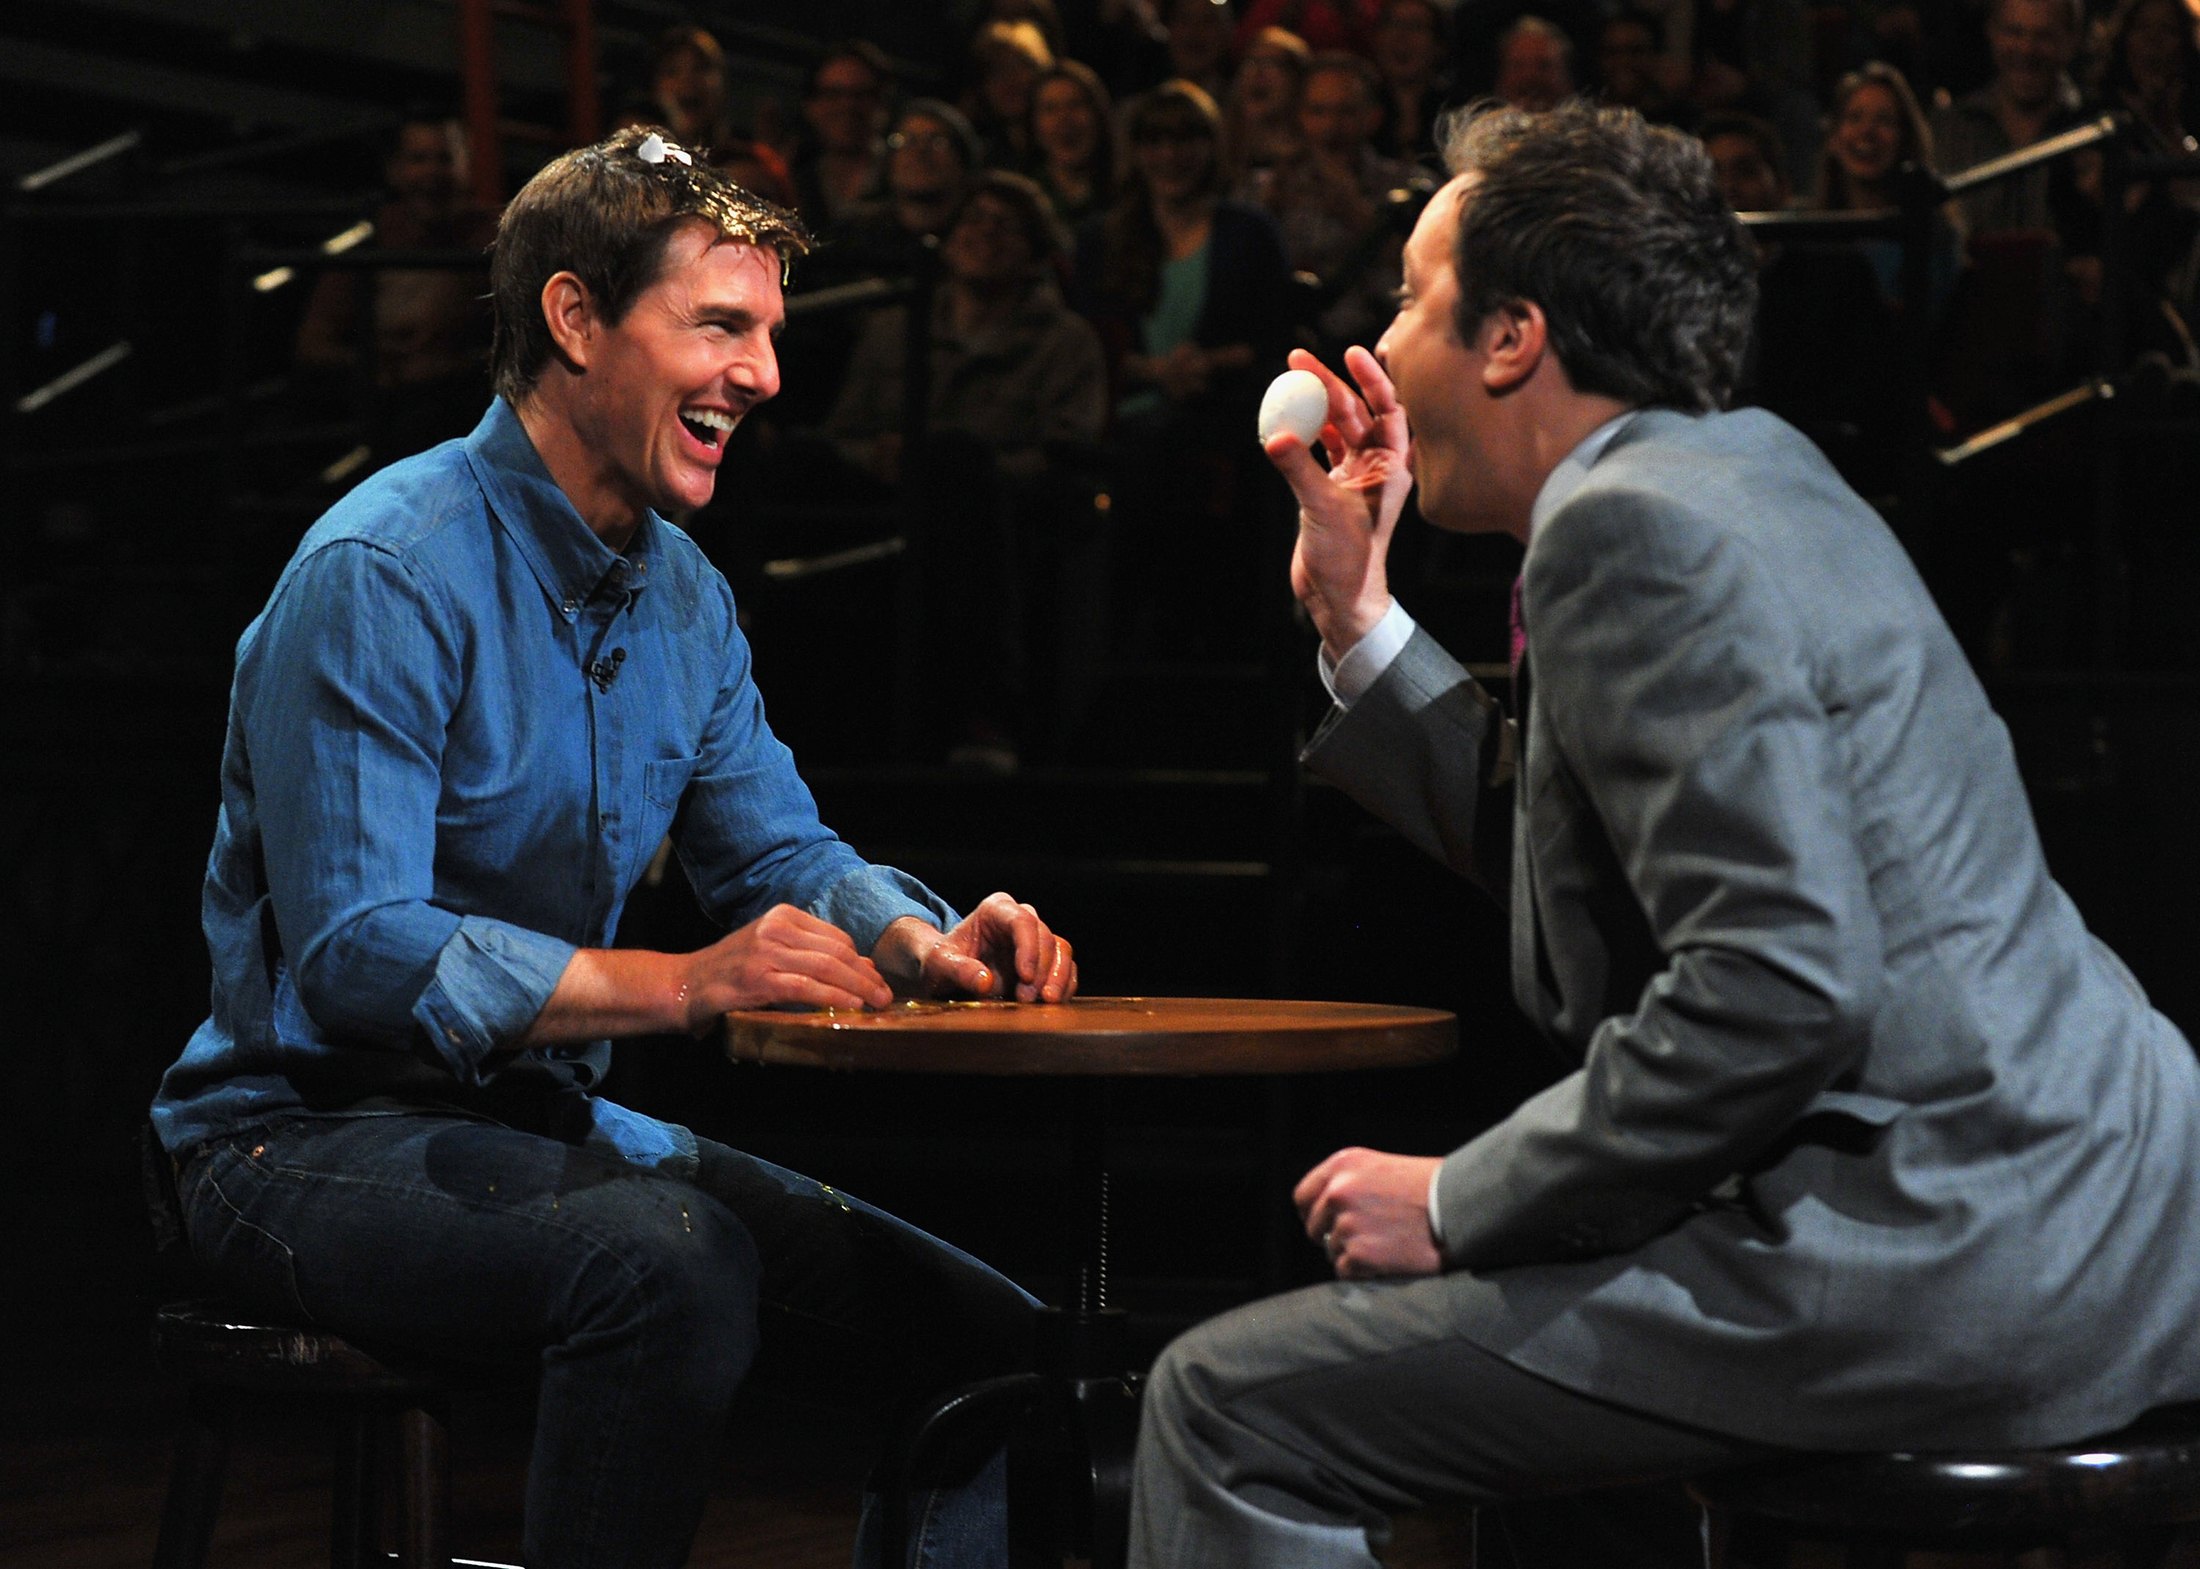 late-night-with-jimmy-fallon-april12-2013-007.jpg